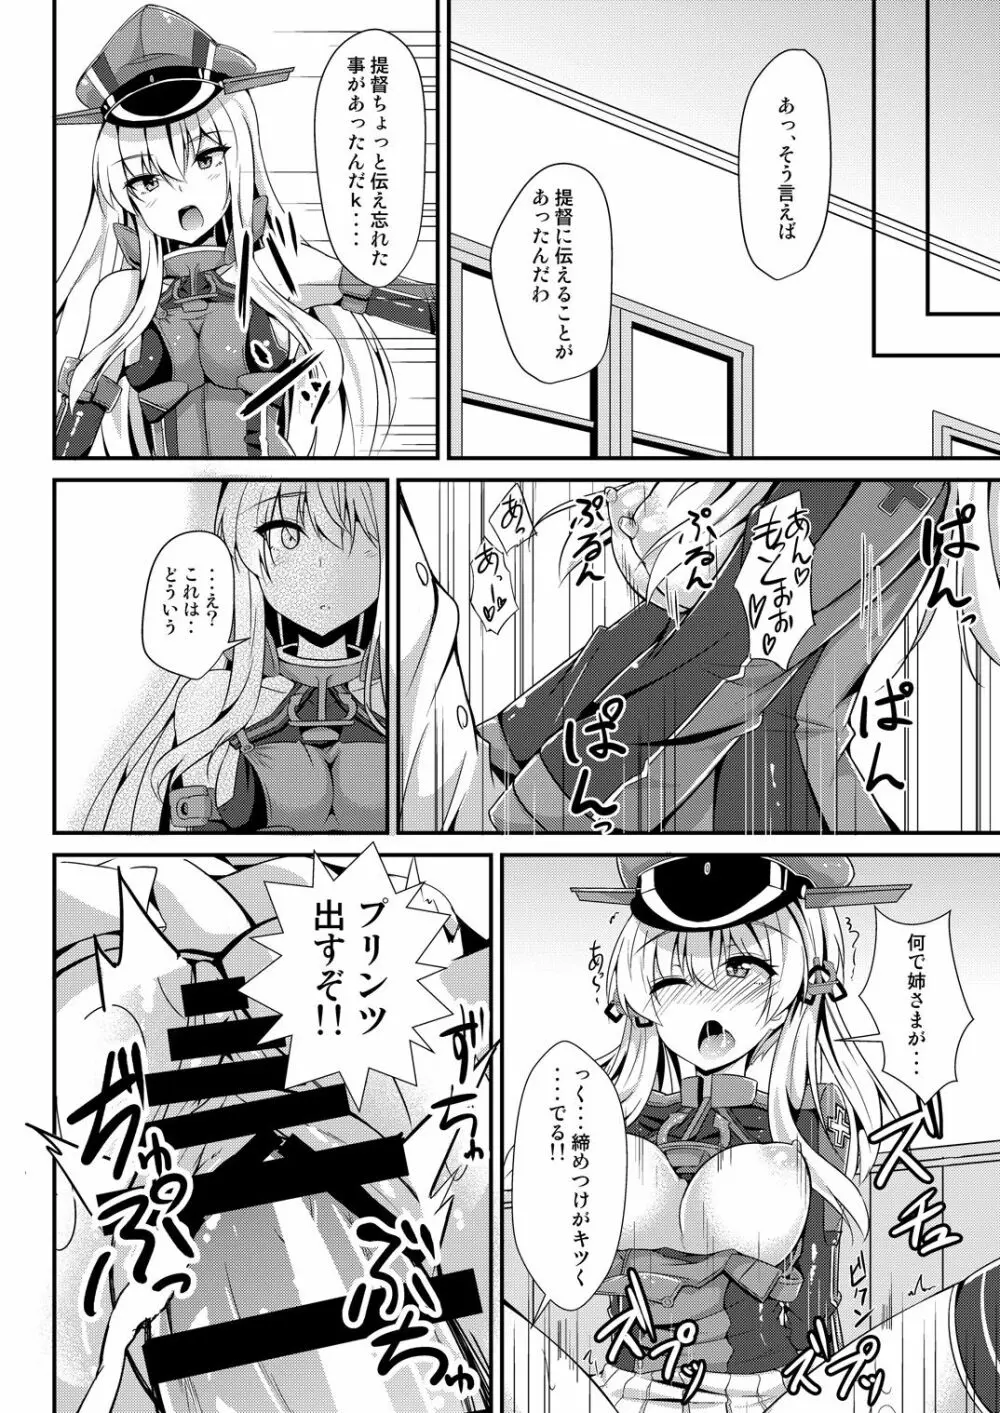 Daily life of admiral and two German ship 提督と二人の日常 13ページ